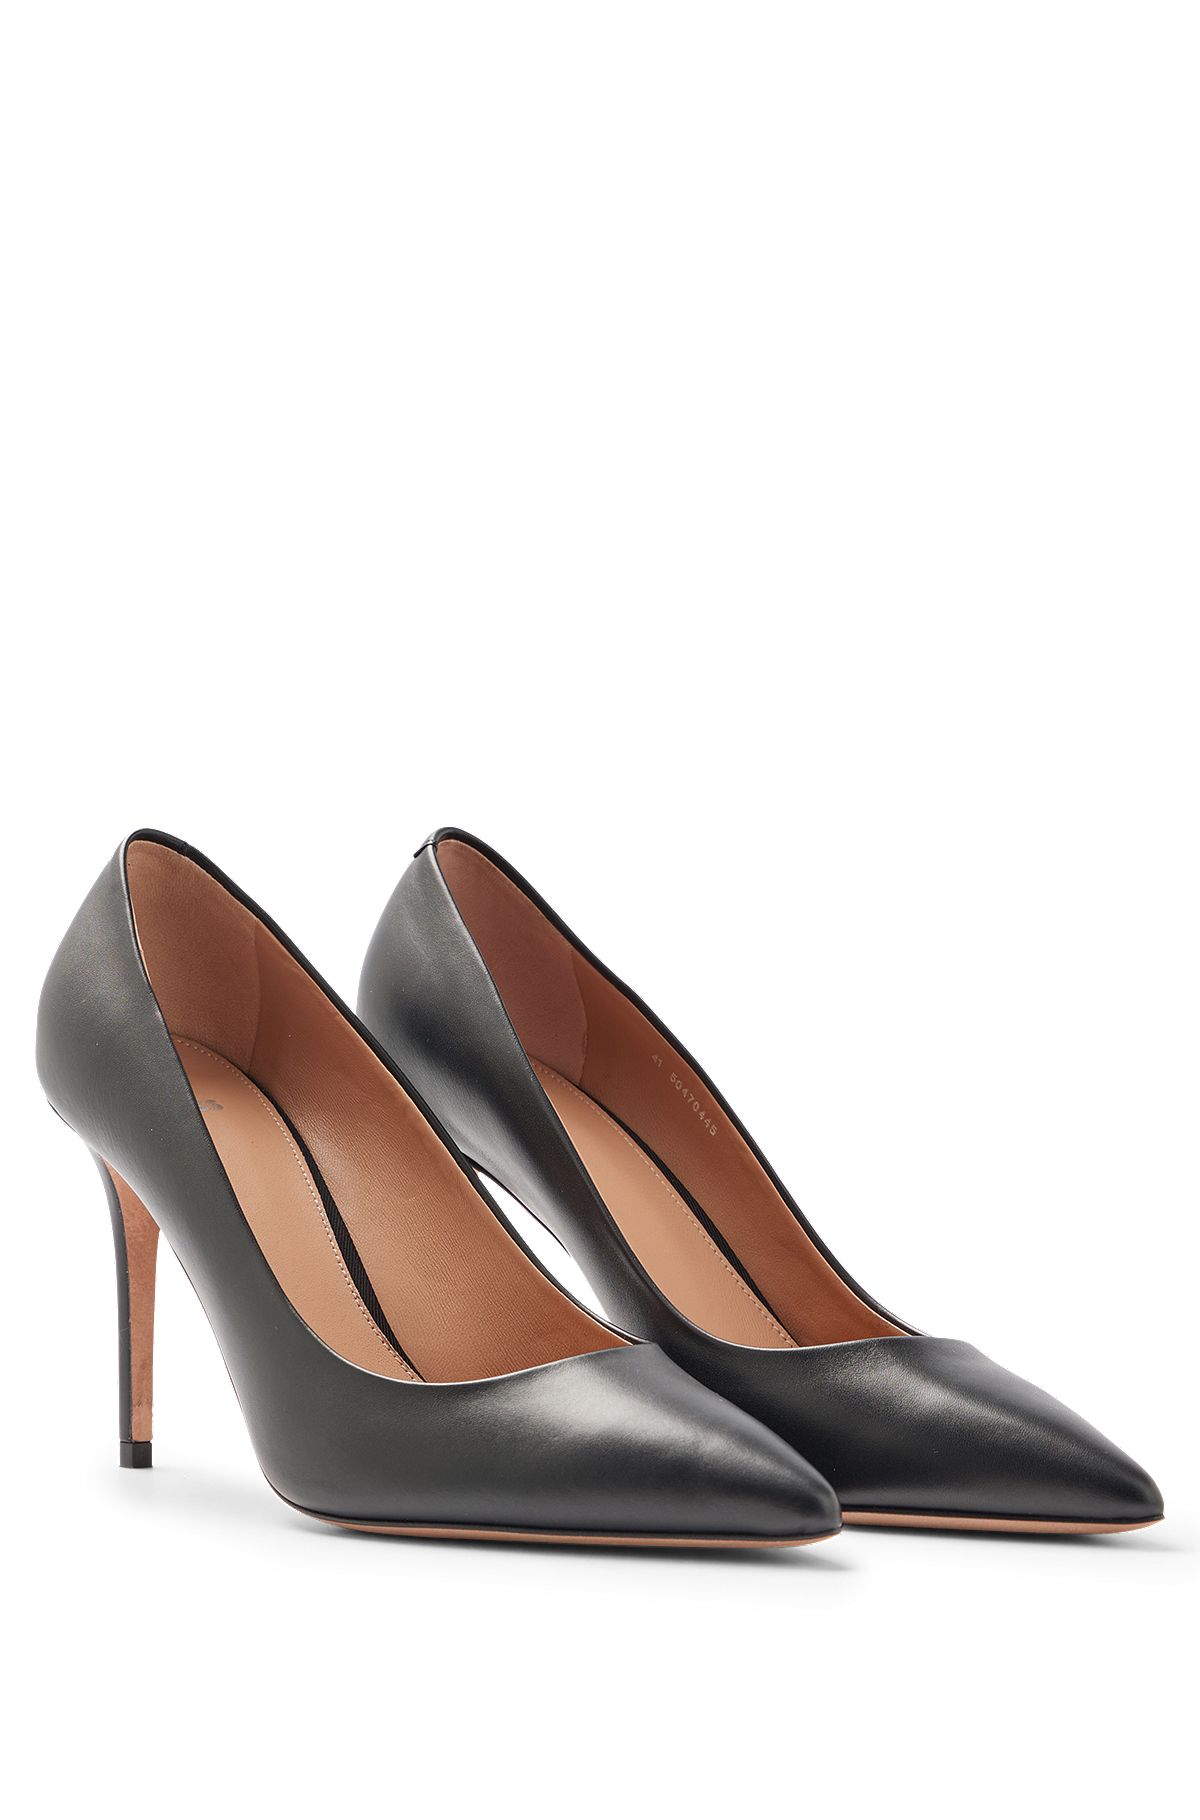 Heeled pumps in Italian leather with pointed toe, Black